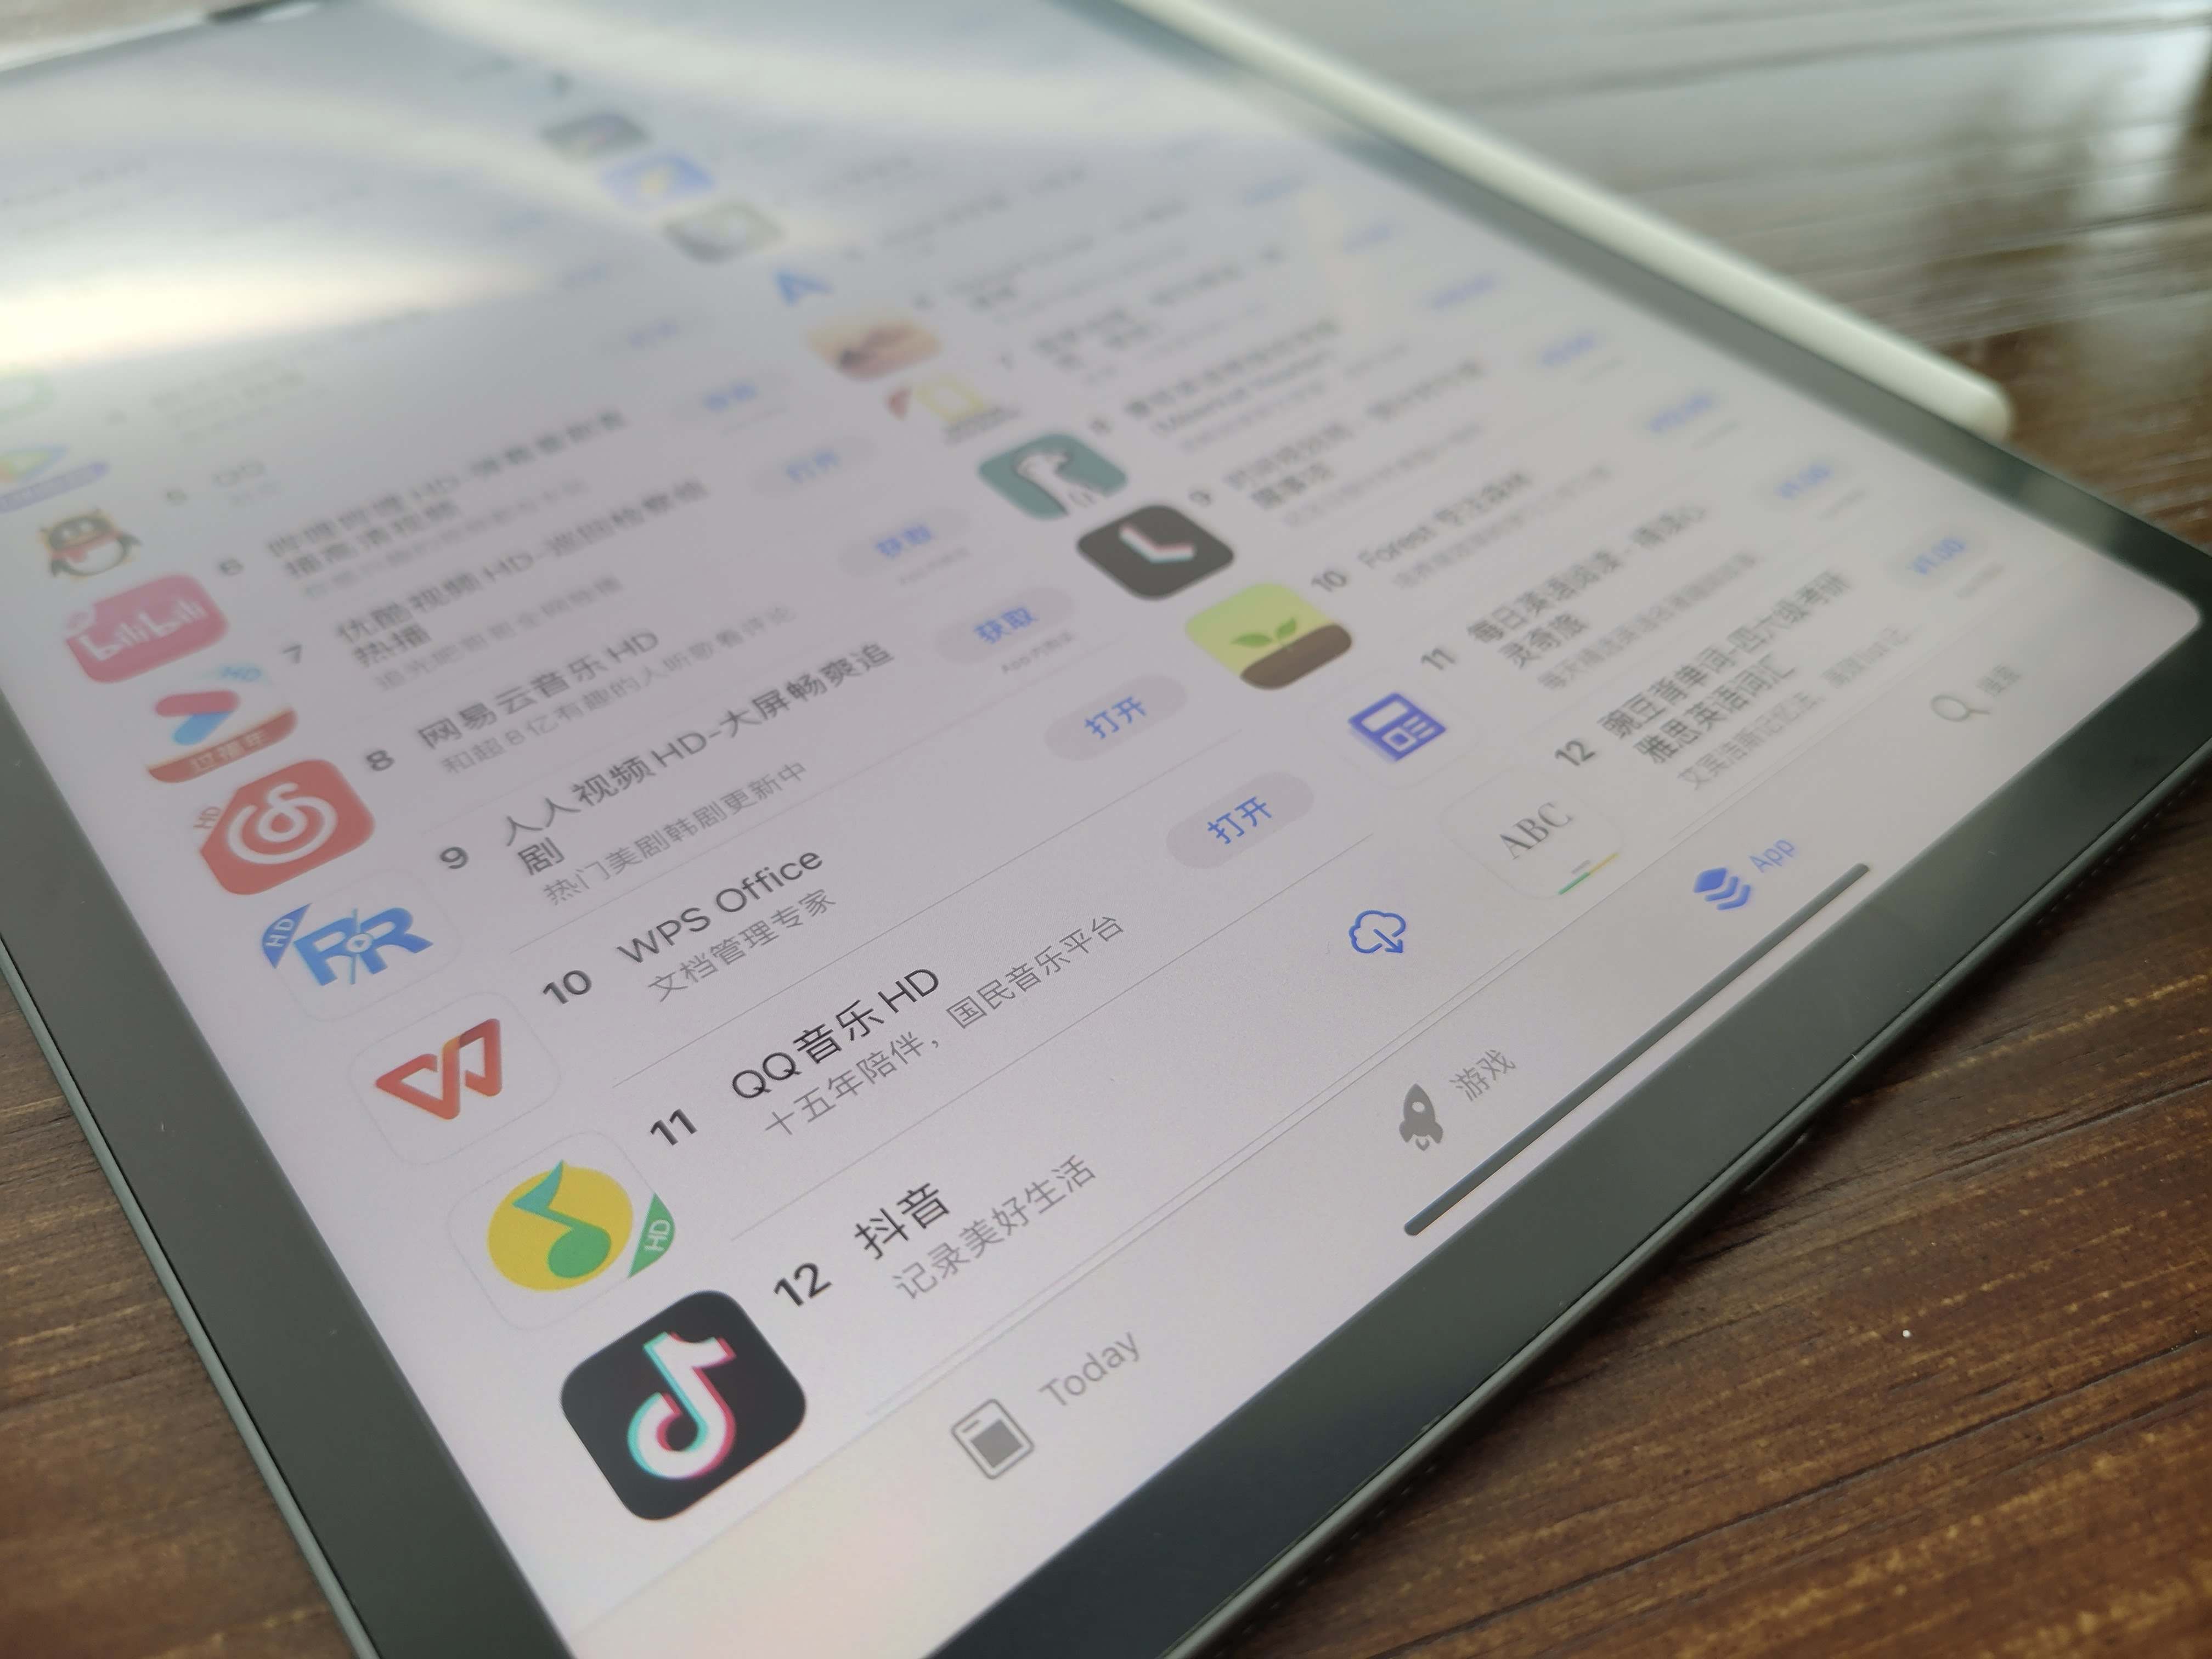 What are the 20 most commonly used App in China?